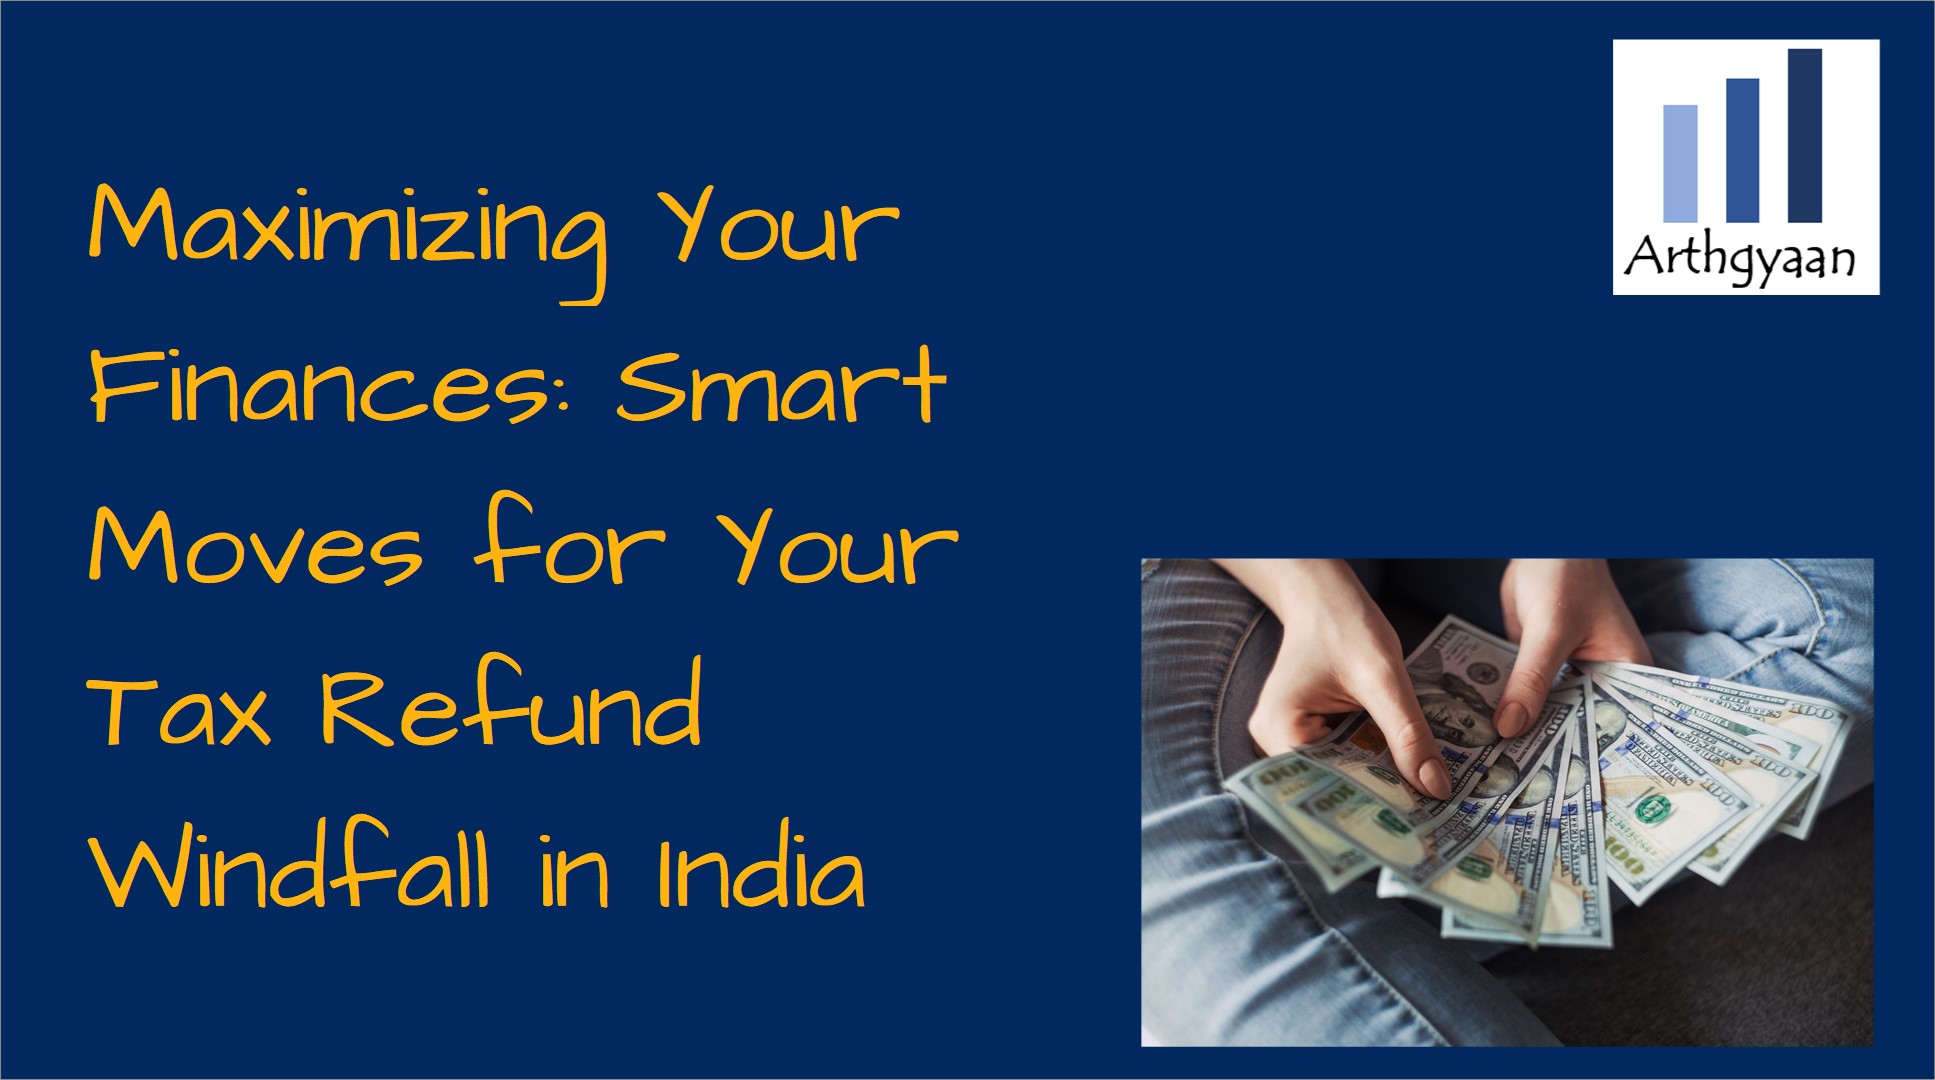 Maximizing Your Finances: Smart Moves for Your Tax Refund Windfall in India